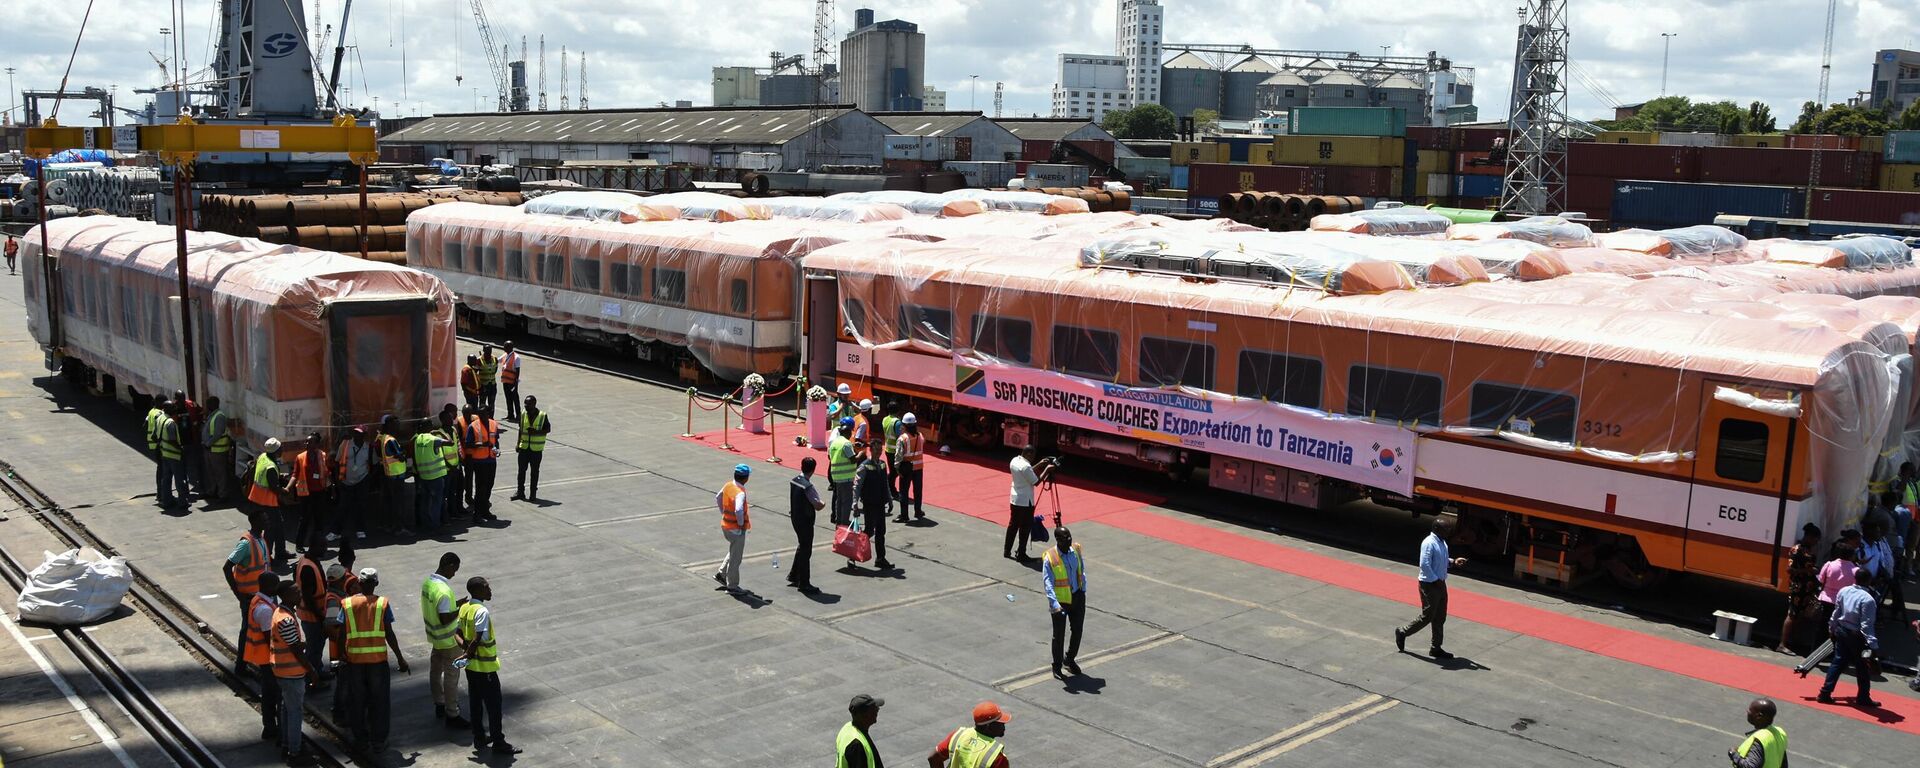 Carriages for the Tanzania's Standard Gauge Railway (SGR) project are unloaded as Tanzania received 14 economy class carriages of South Korean company Sung Shin Rolling Stock (SSRT) at the port in Dar es Salaam on November 25, 2022.  - Sputnik Africa, 1920, 12.11.2023